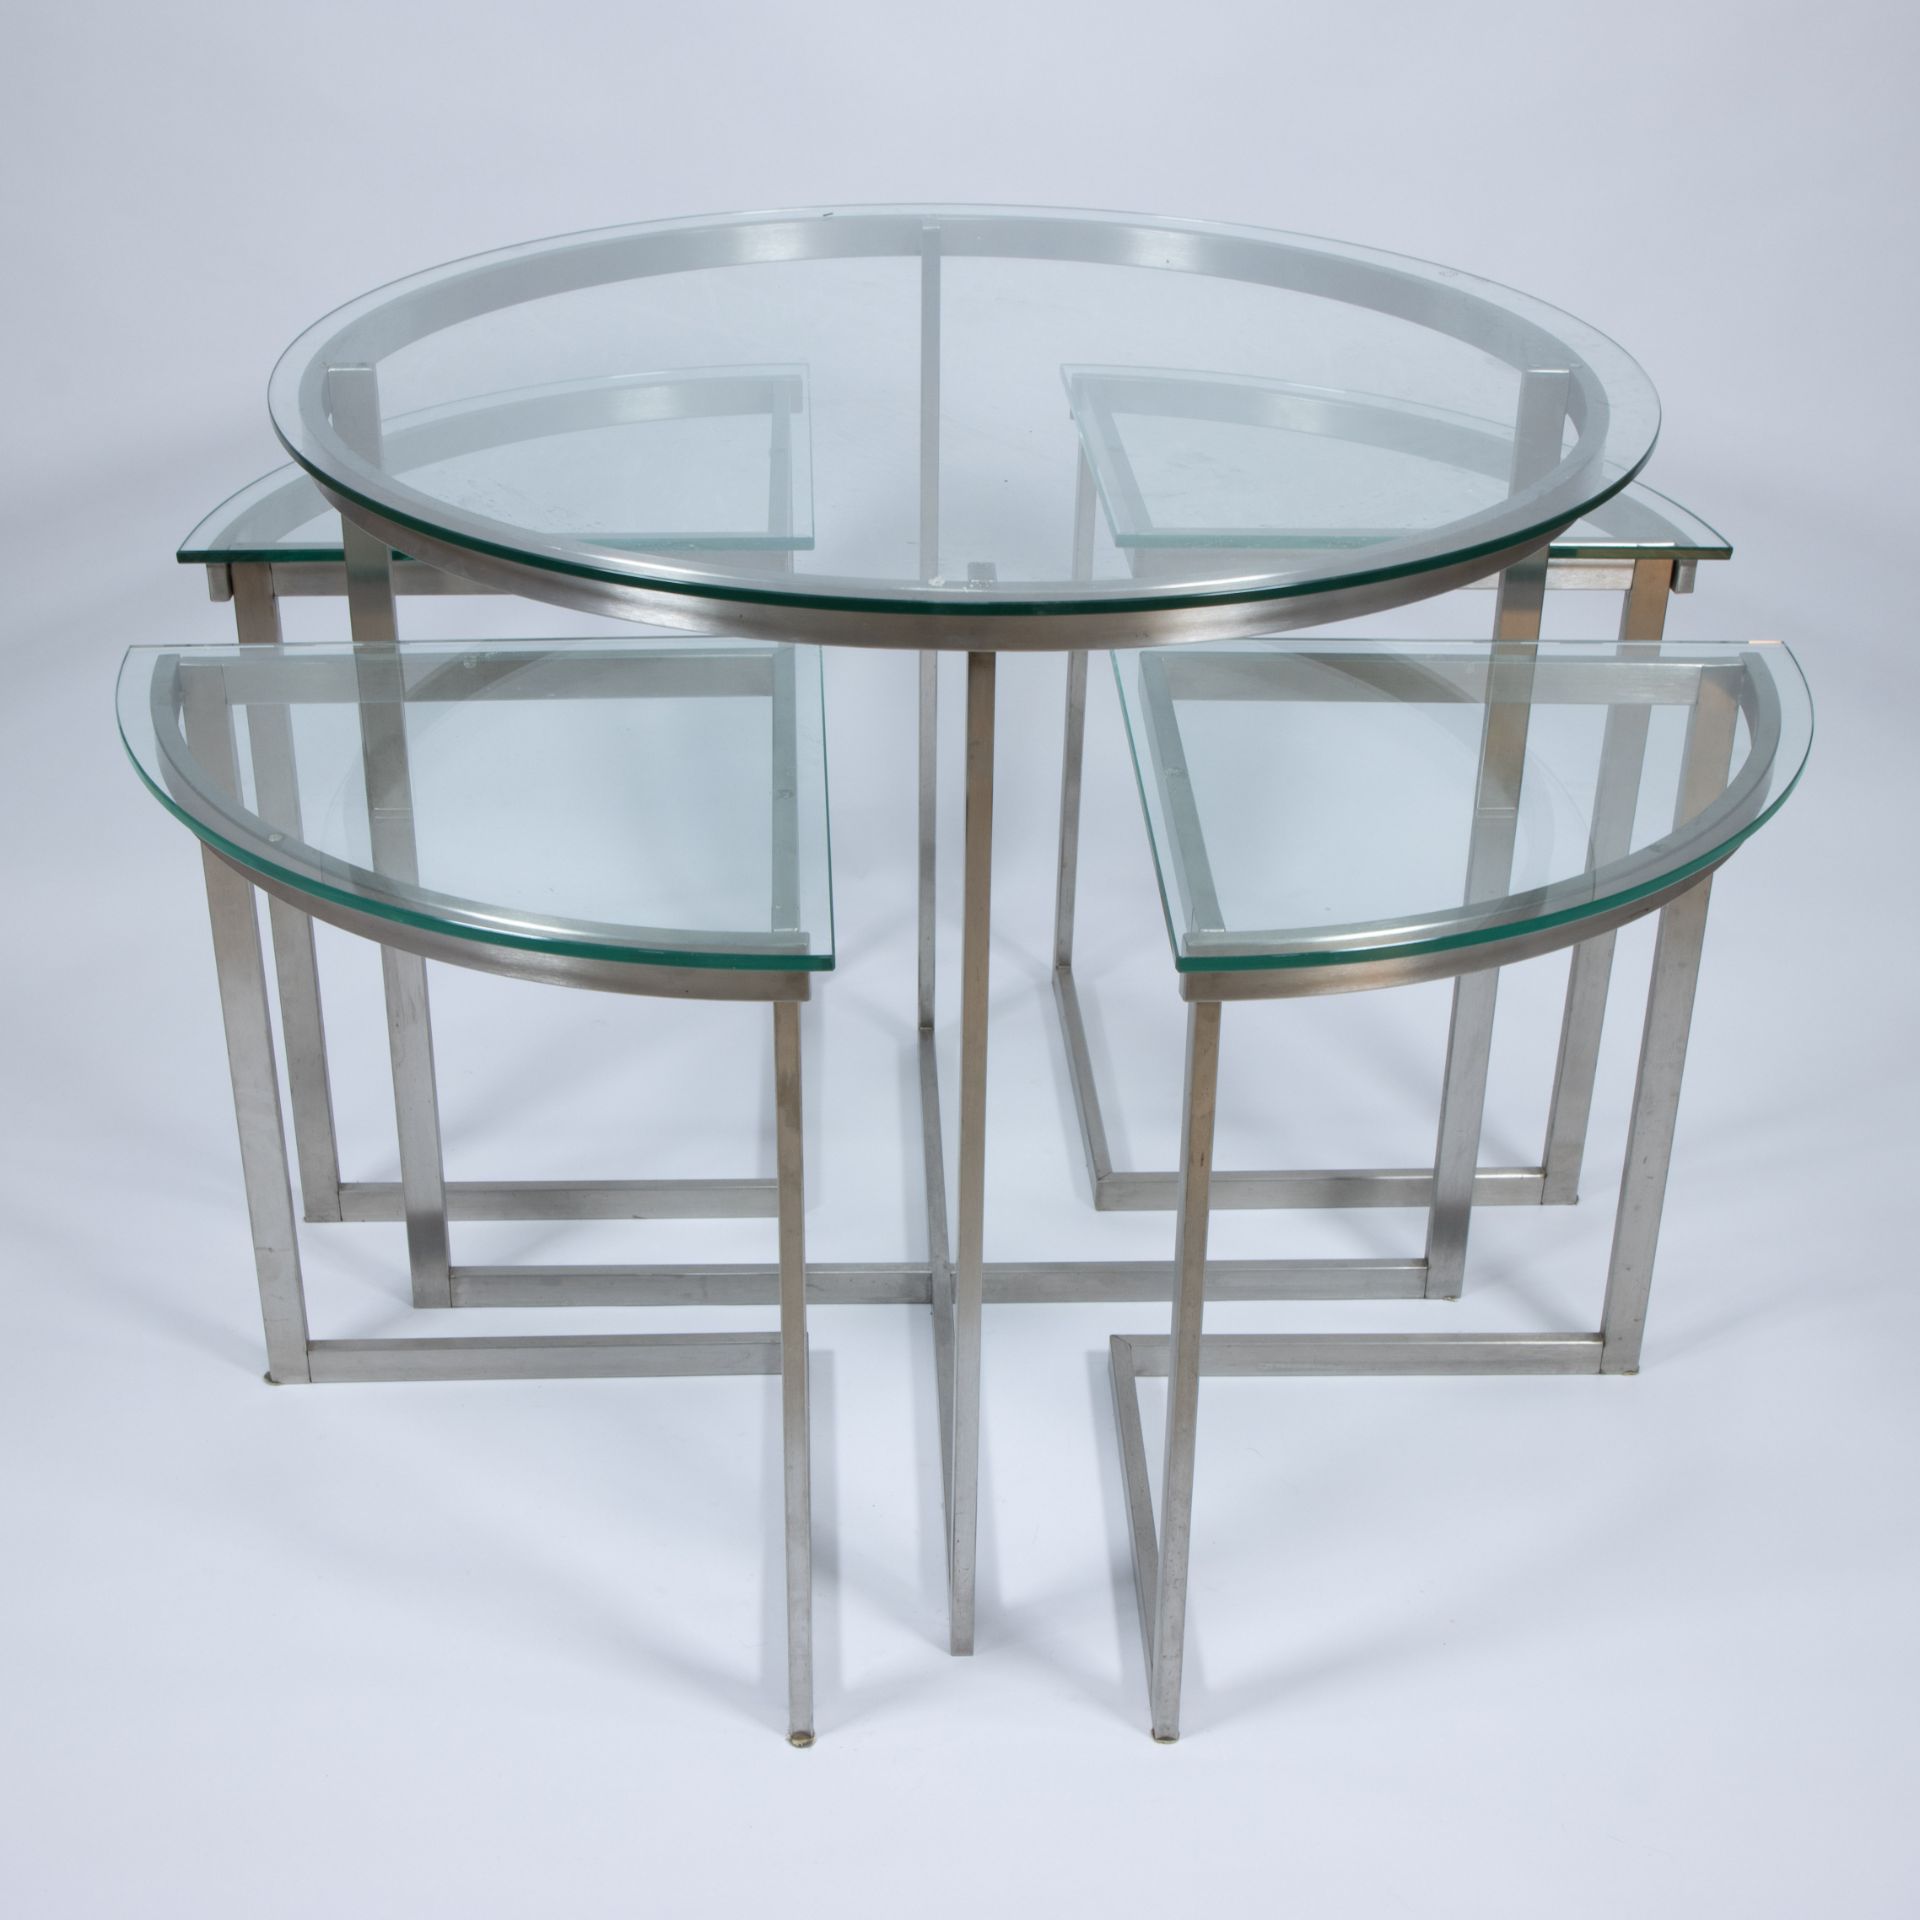 Round design glass coffee table with silver-plated metal base (5-piece set) - Image 2 of 2